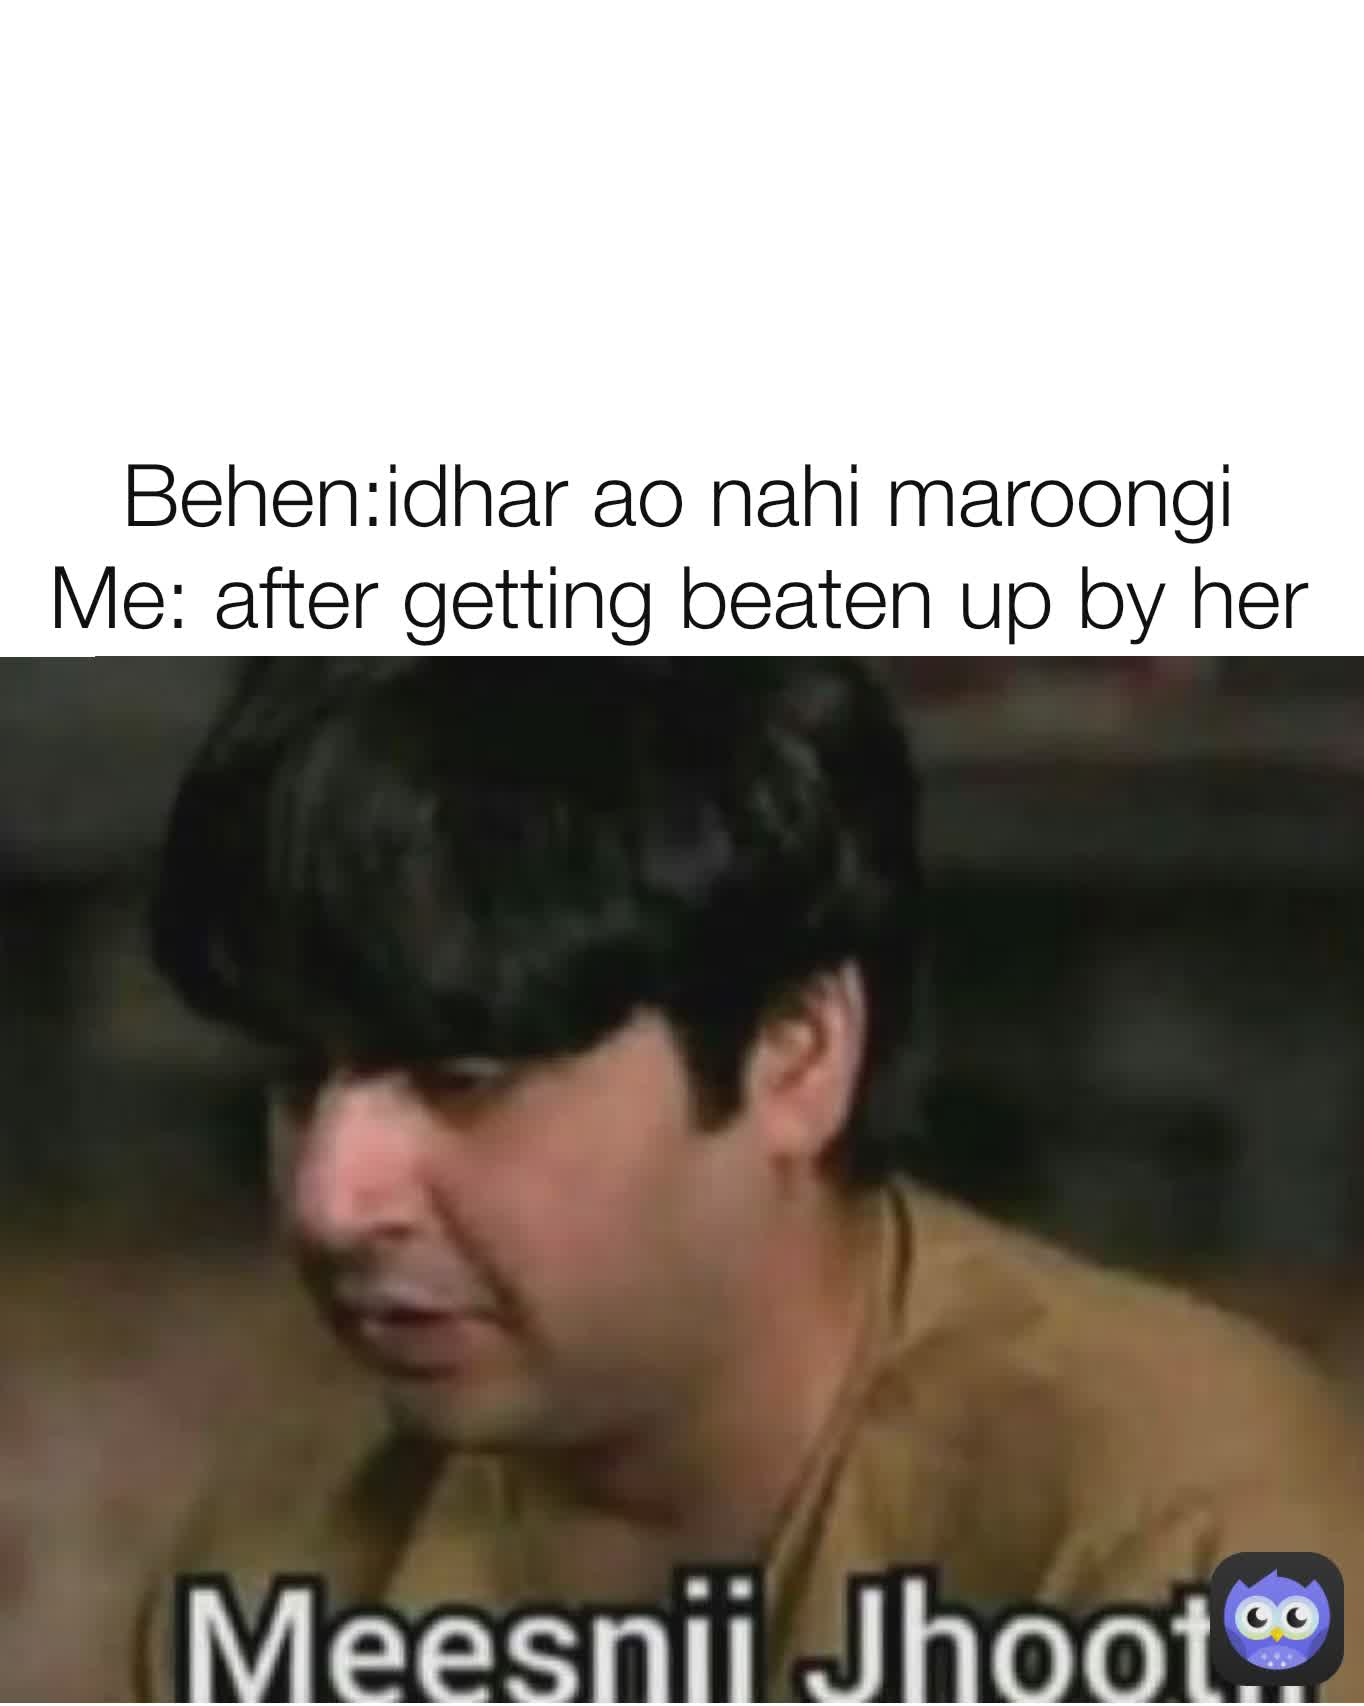  Behen:idhar ao nahi maroongi 
Me: after getting beaten up by her